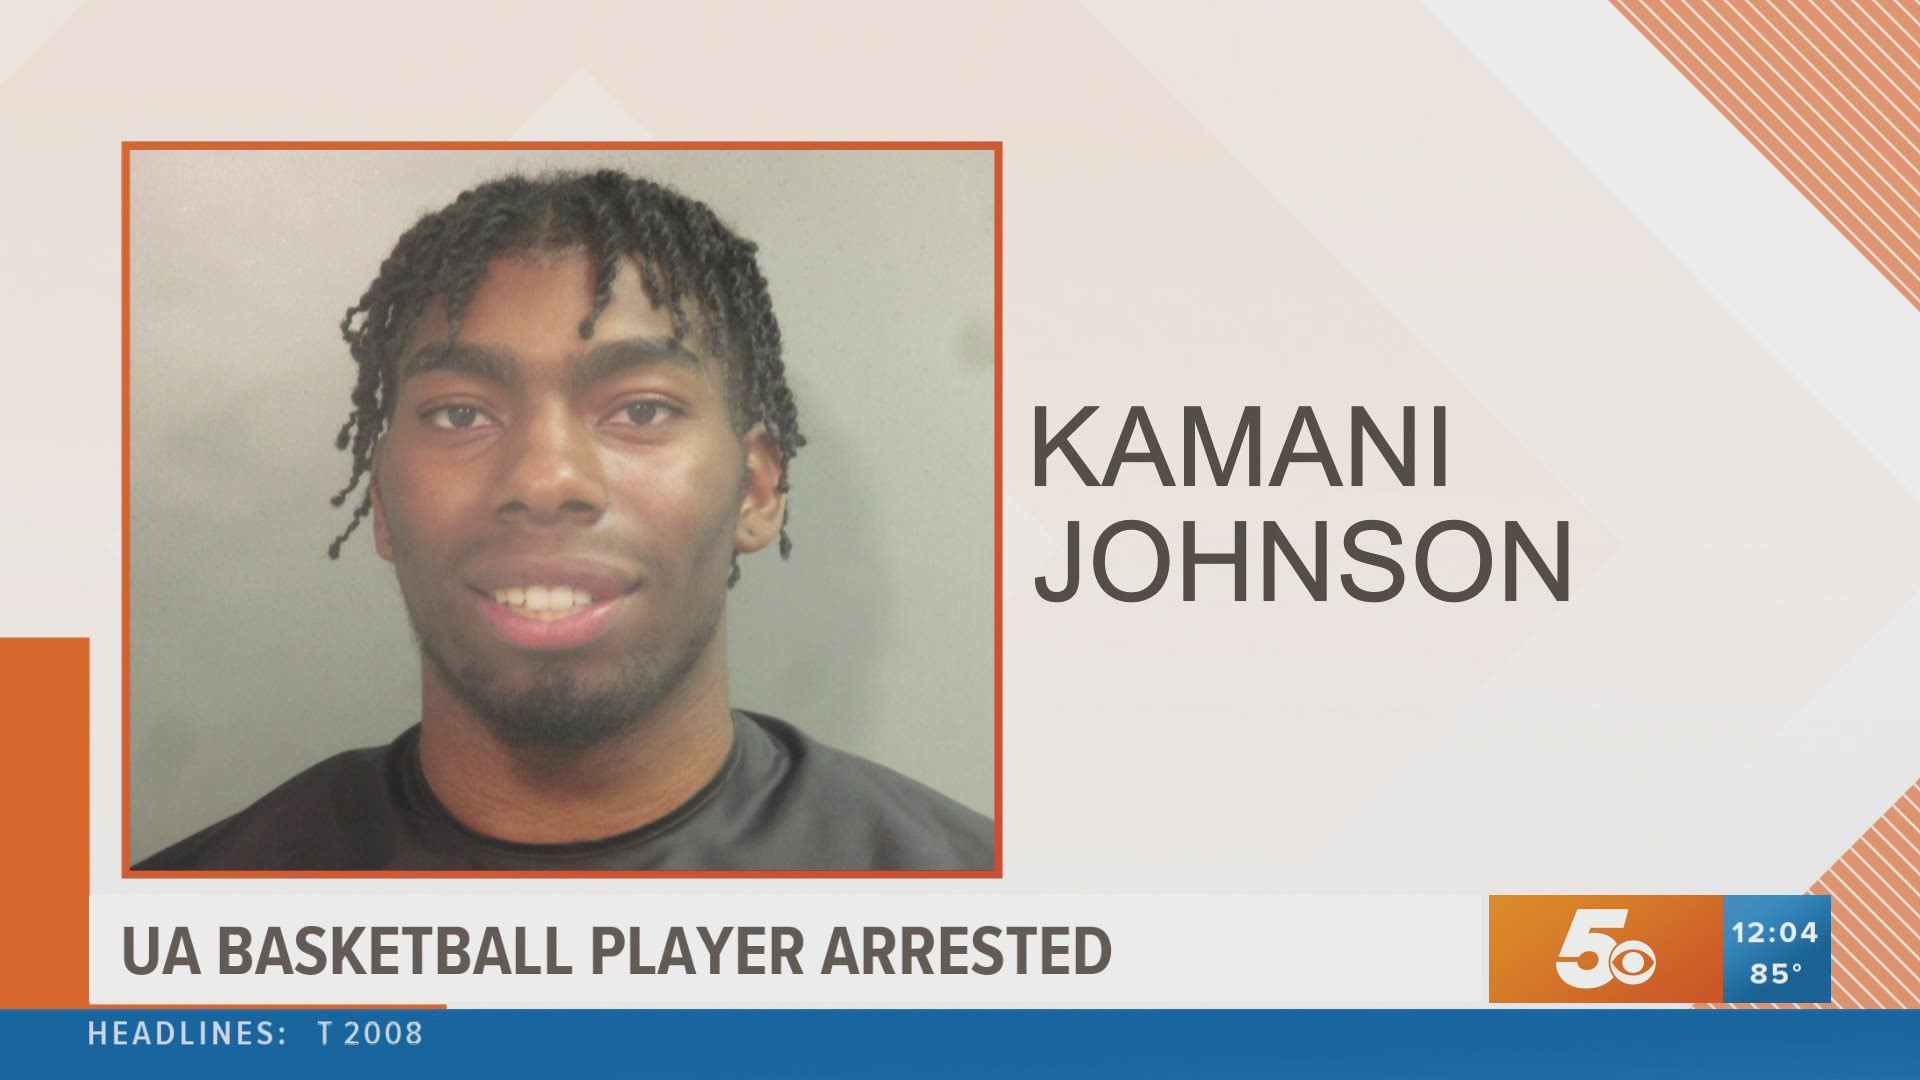 Kamani Johnson was booked into jail on a disorderly conduct charge.